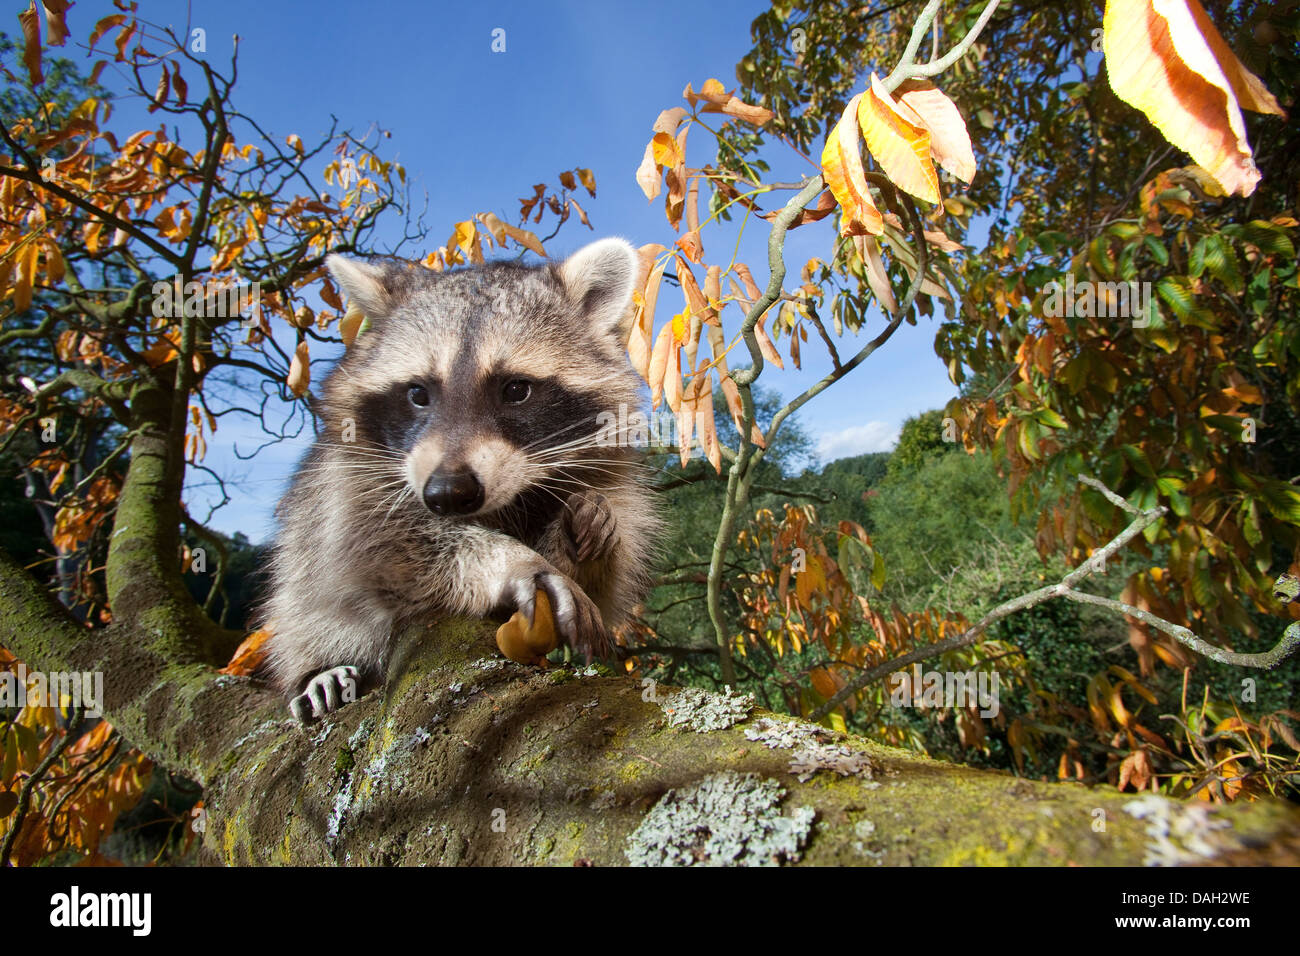 common raccoon (Procyon lotor), six month oldmale climbing on a tree, Germany Stock Photo